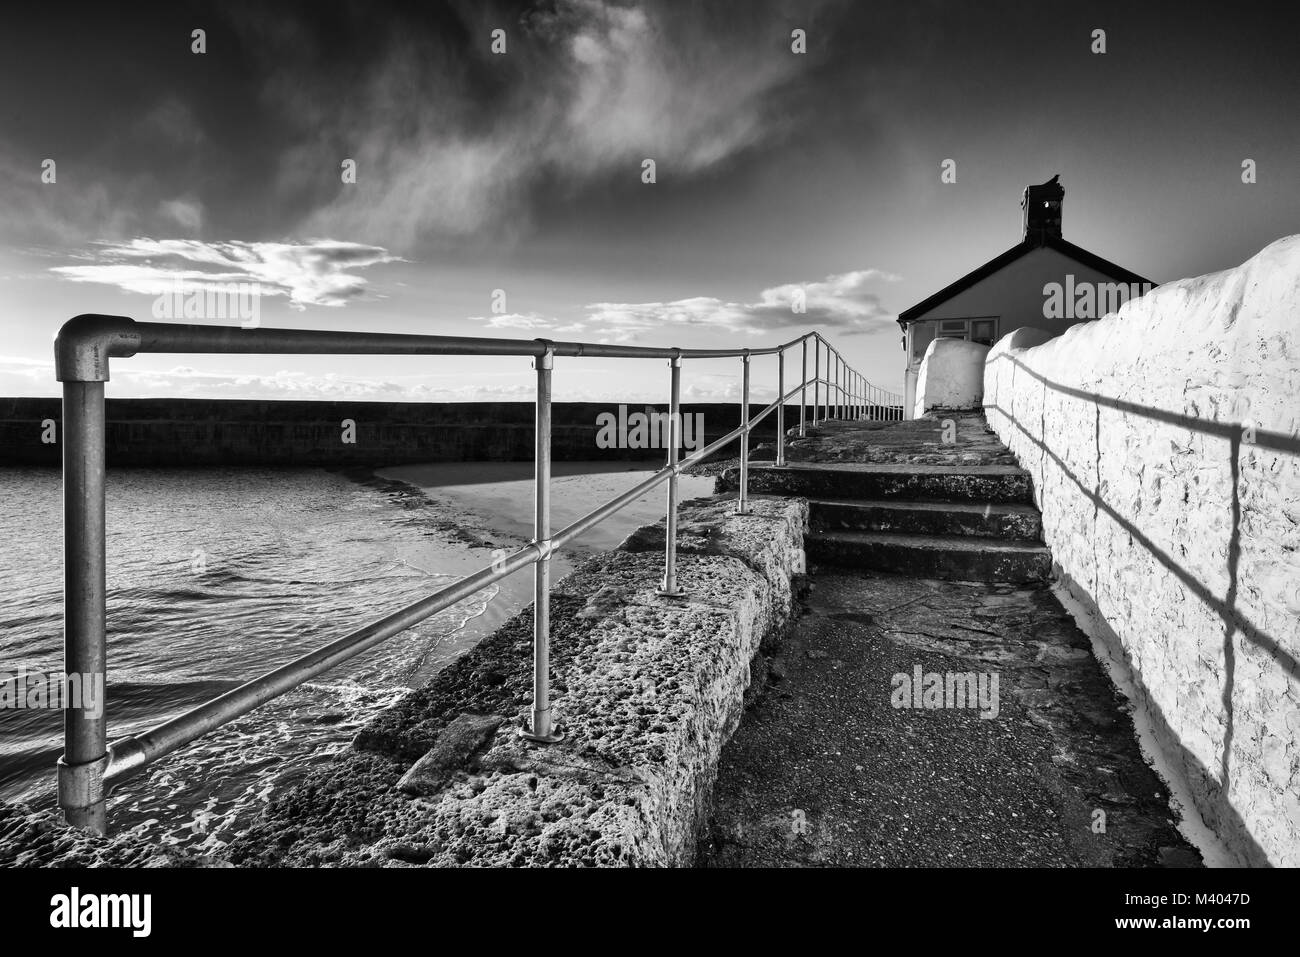 Lyme regis harbour in Black and White. Stock Photo